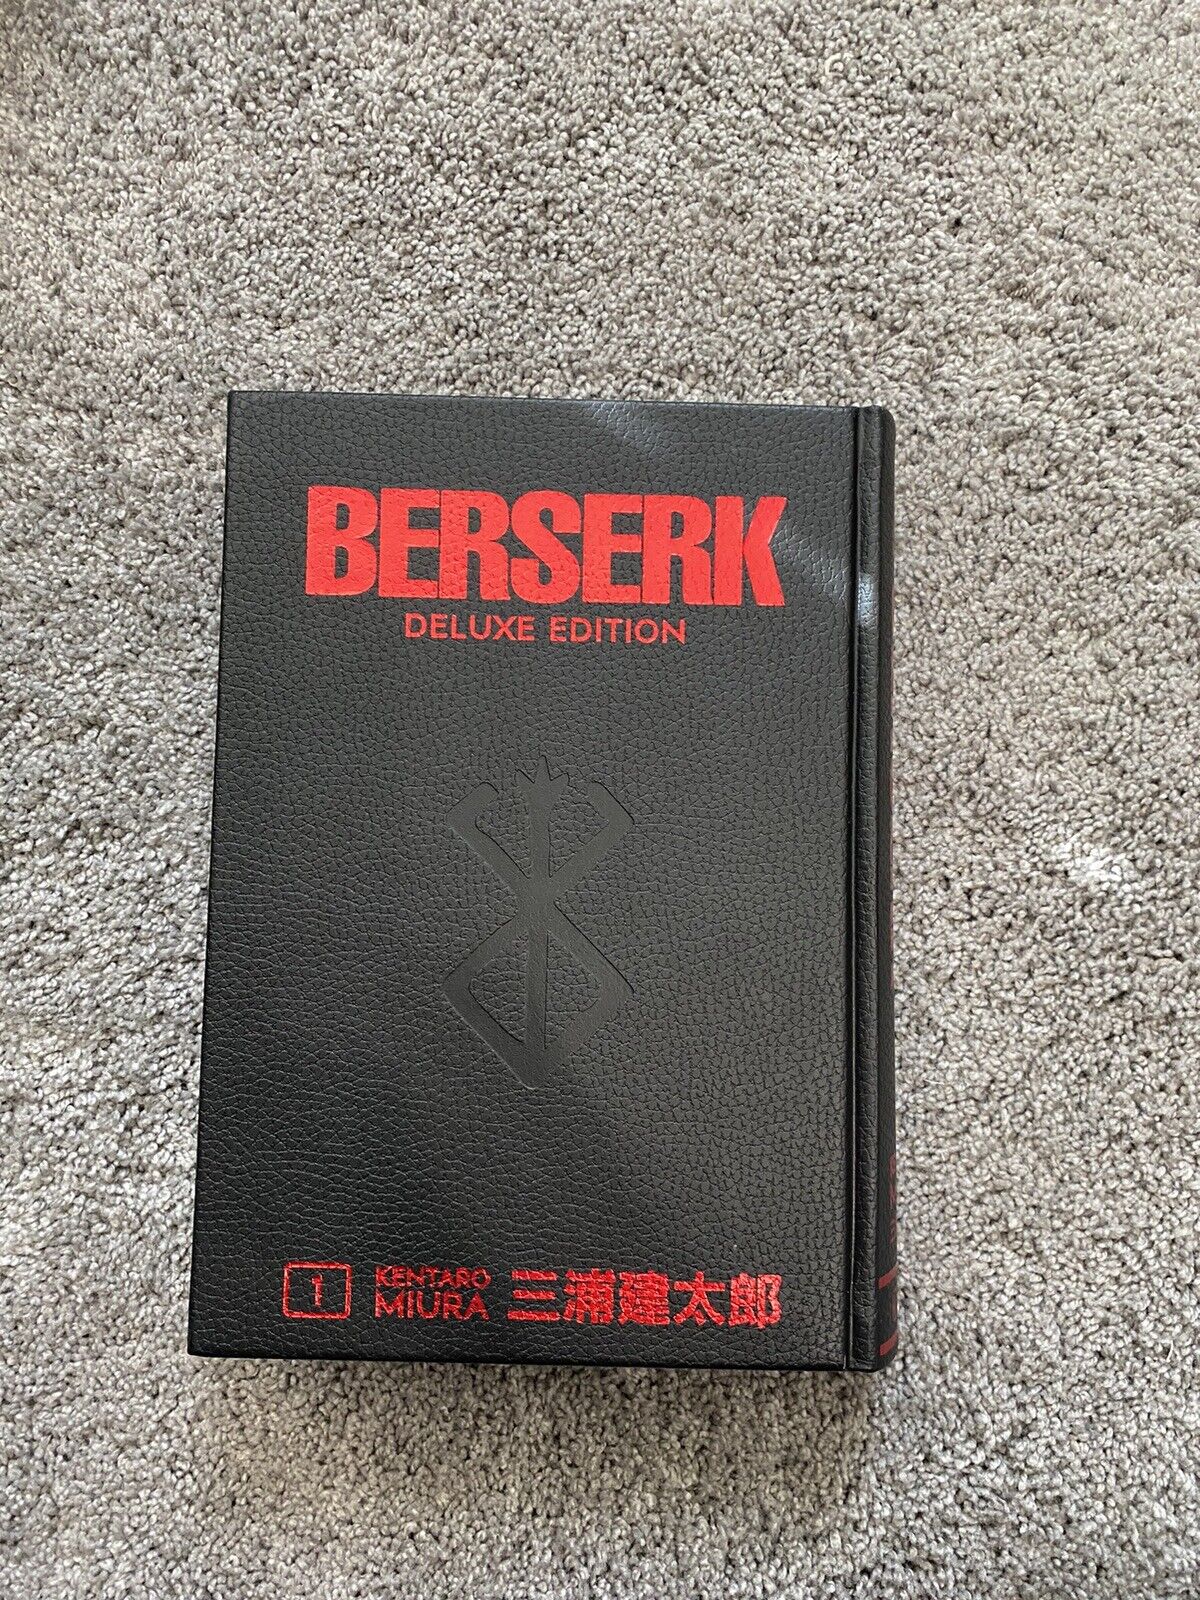 DO NOT BUY berserk deluxe volume 1-3 (message me for which one you want)